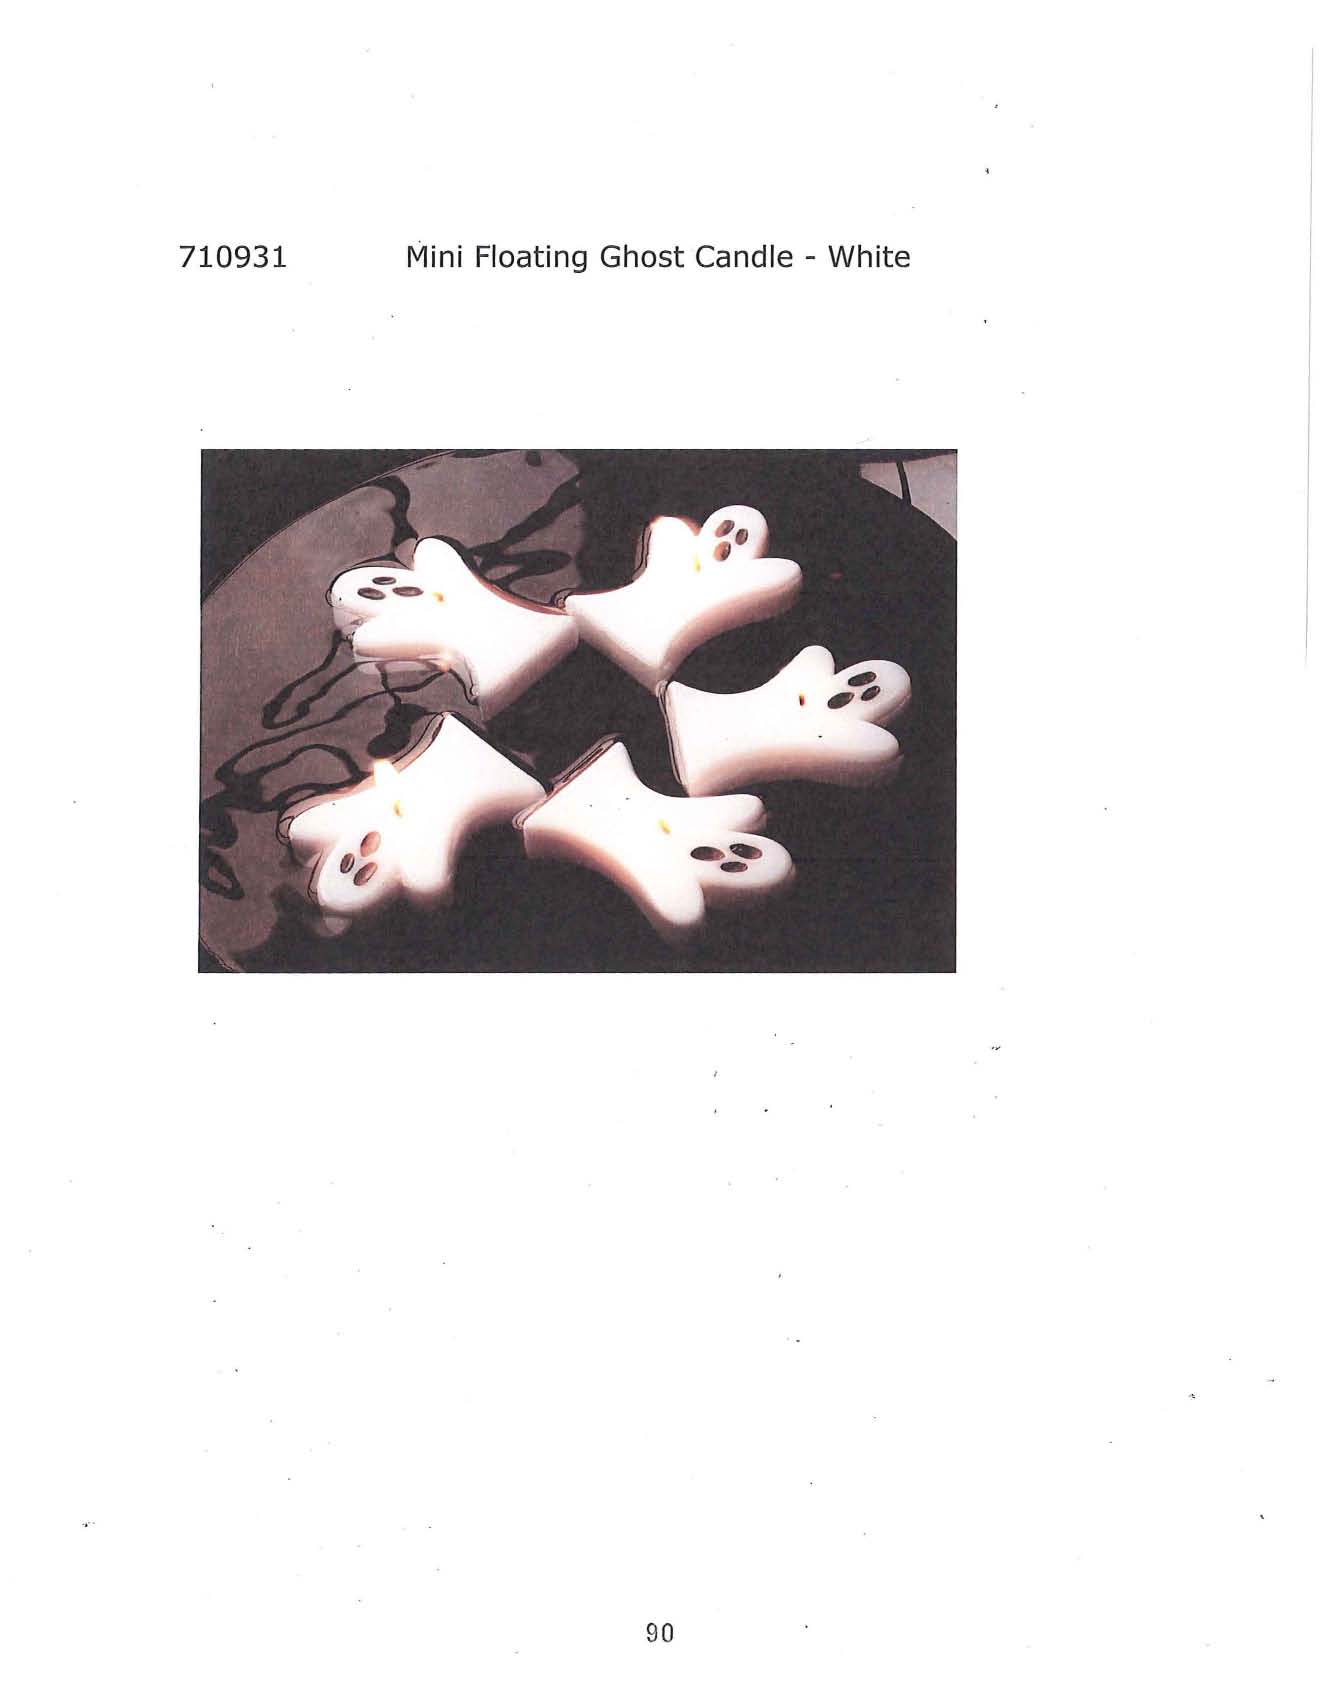 Mini Floating Ghost Candle - White